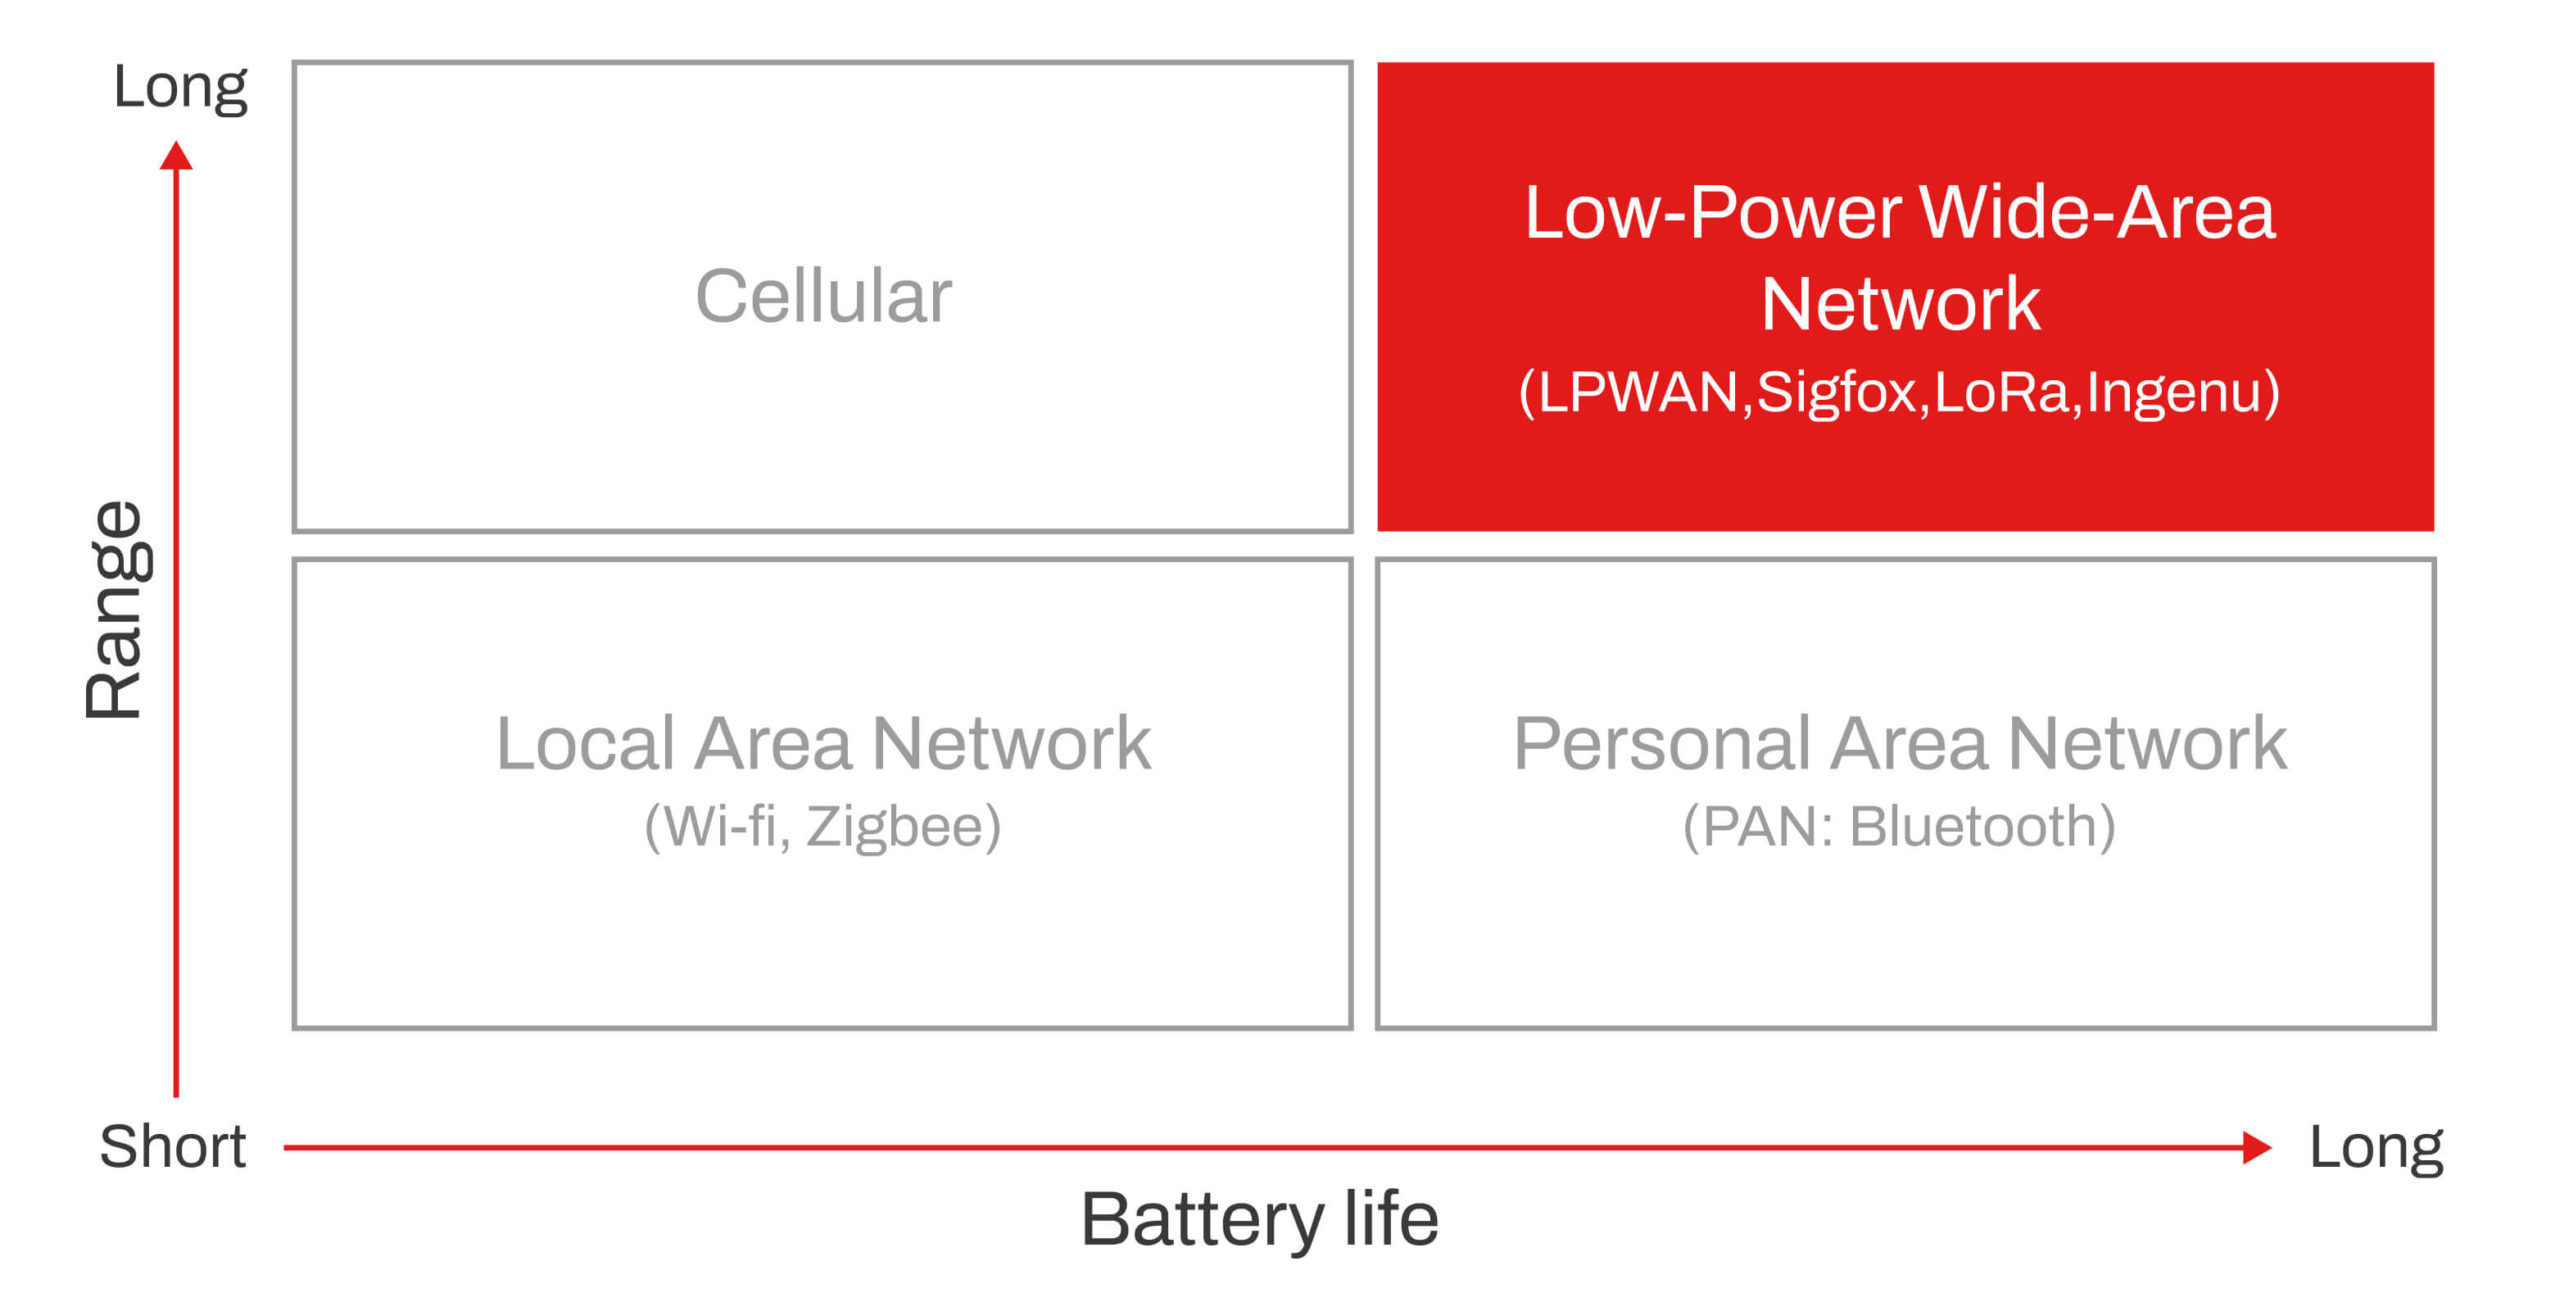 Low-power wide-area network or LPWAN is a specifically designed wireless communication network that allows long-range communications at a low bit rate between battery-operated sensors and gateways.